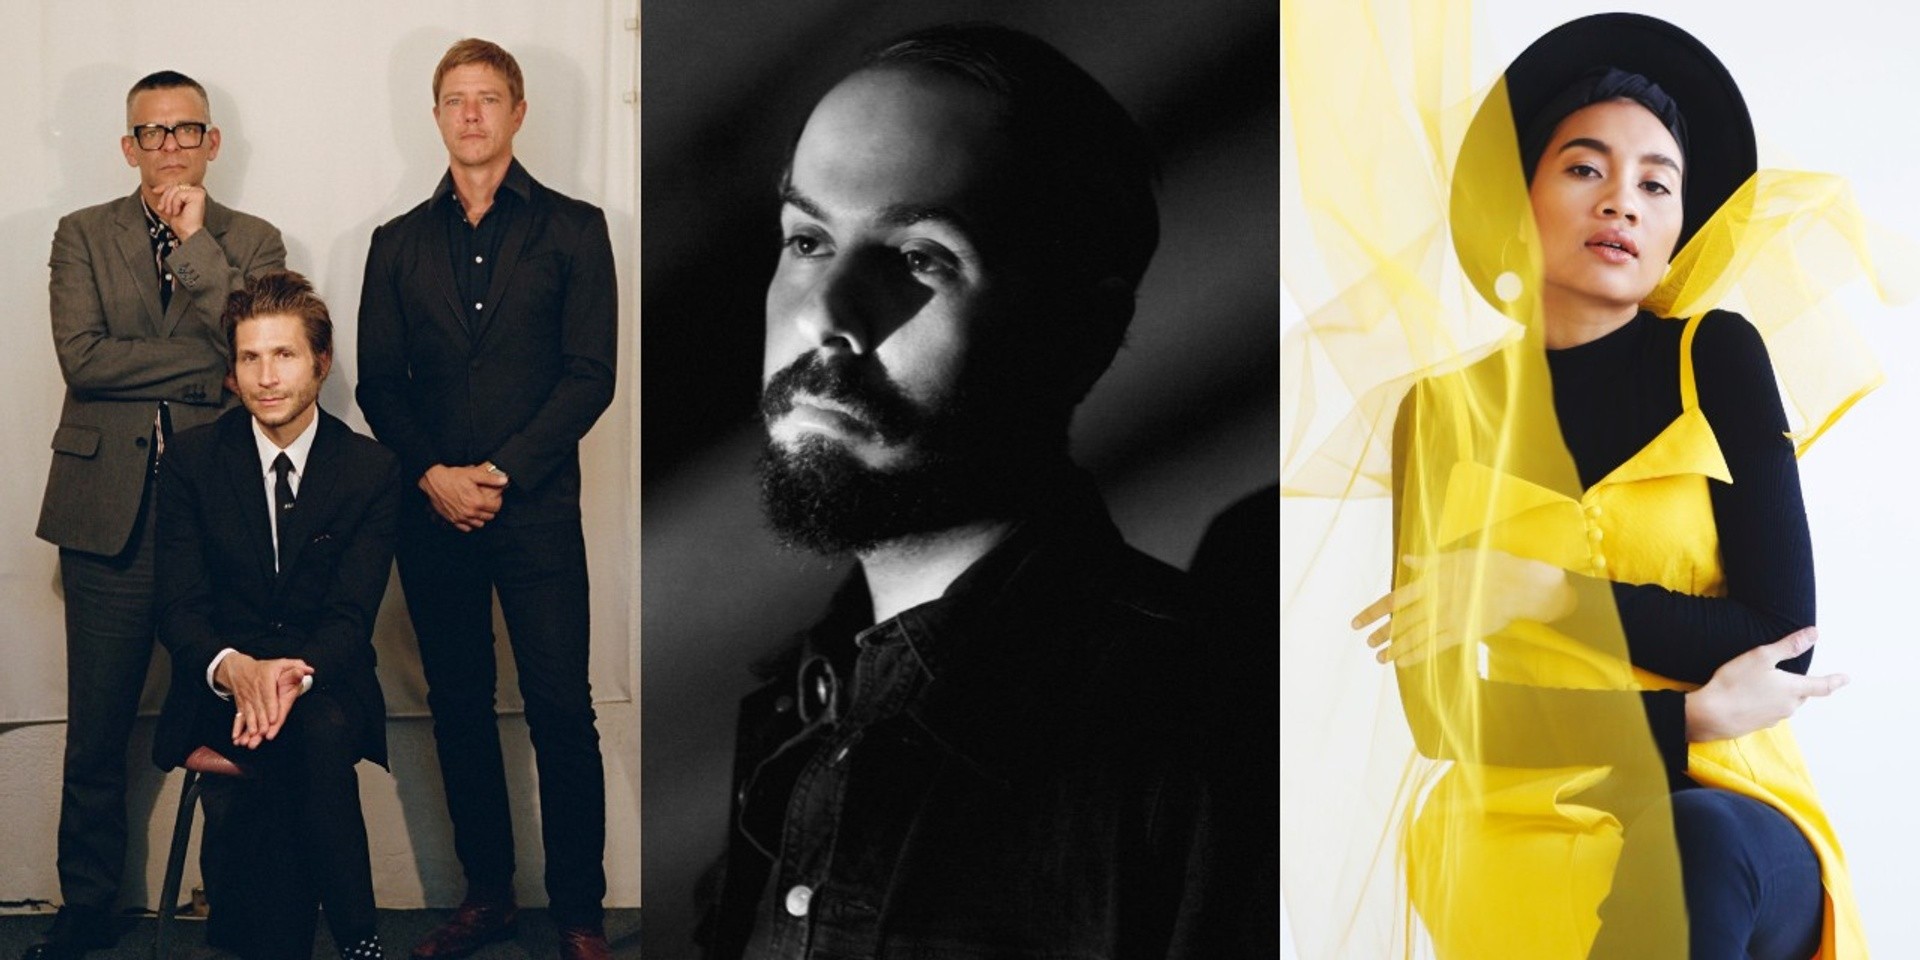 Neon Lights returns this November, announces Phase 1 line-up – Interpol, Cigarettes After Sex, Yuna and more 